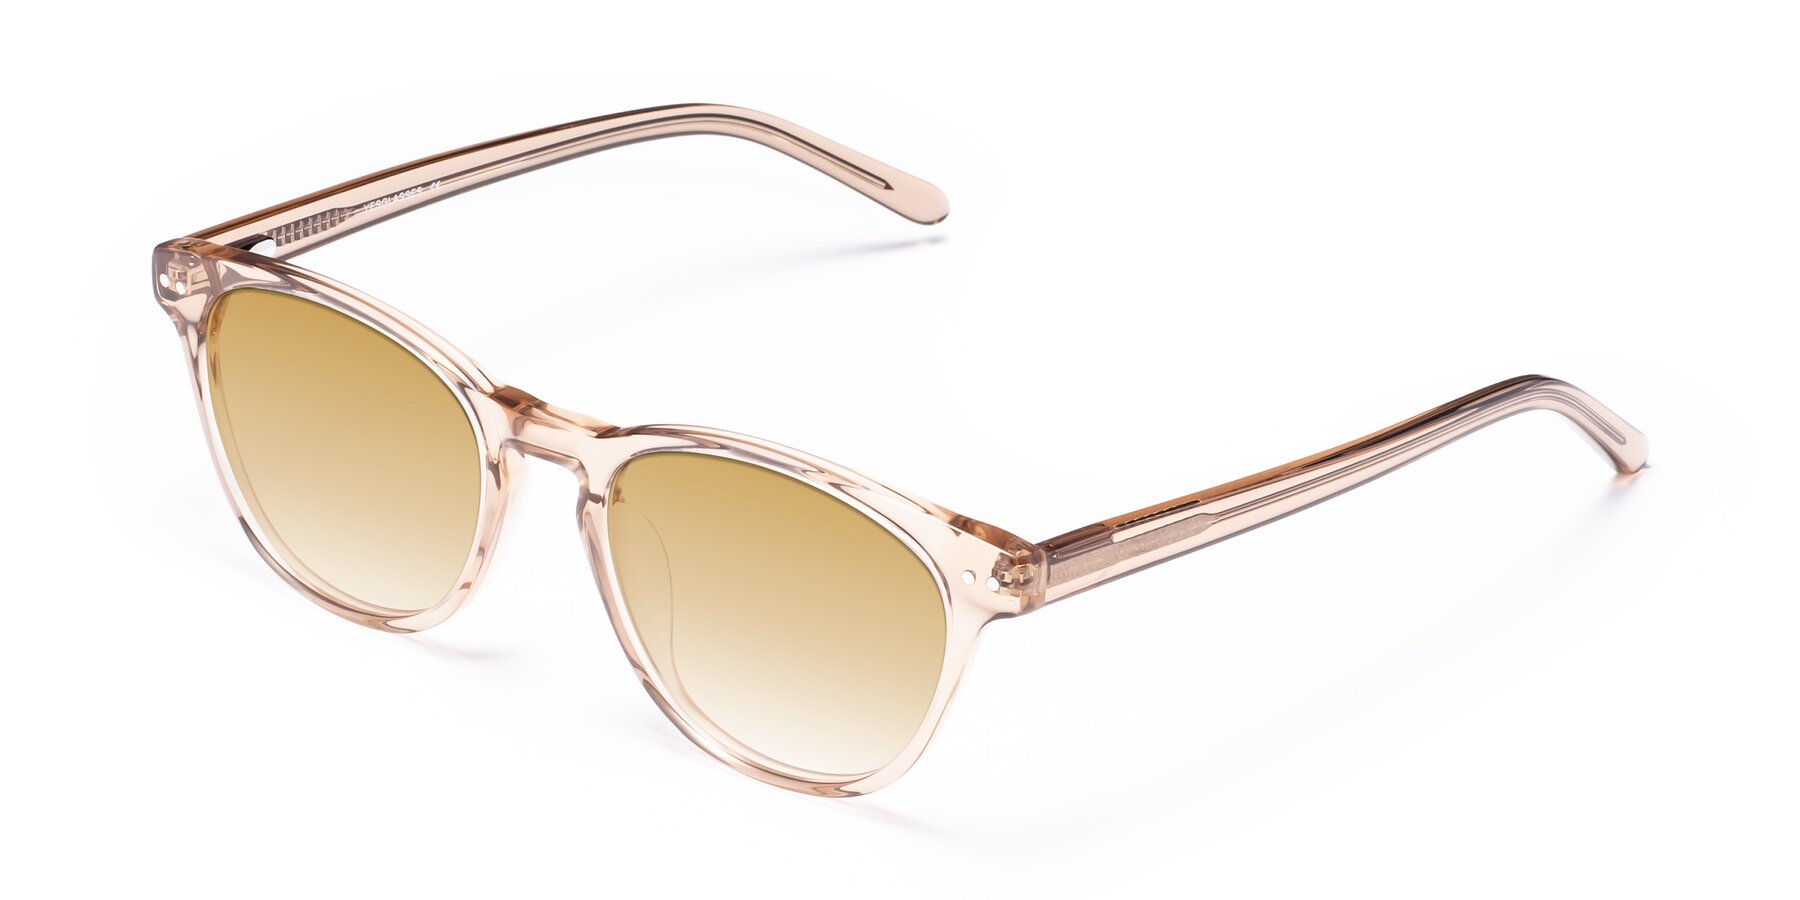 Angle of Blaze in light Brown with Champagne Gradient Lenses